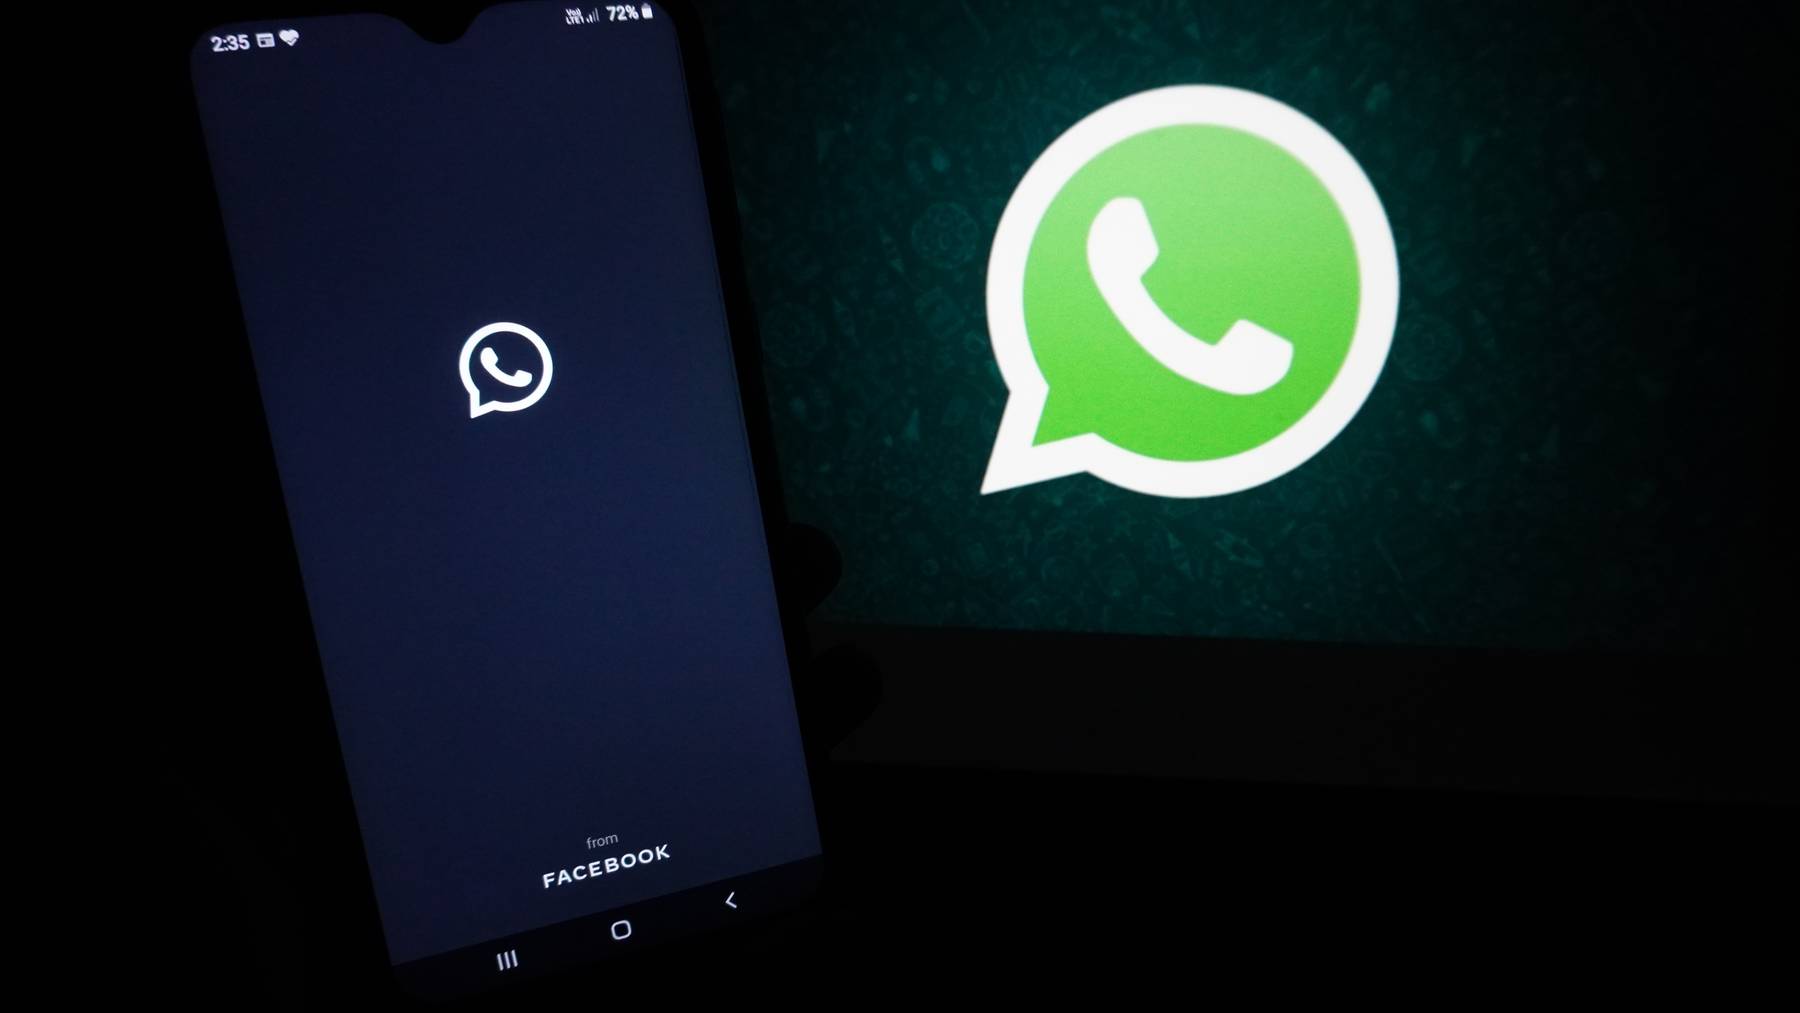 The logo of the messenger app WhatsApp is seen on the screen of a smartphone in New Delhi, India on May 27, 2021. WhatsApp has filed a legal complaint in Delhi against the government seeking to block regulations coming into force from Wednesday that experts say would compel the California-based Facebook unit to break privacy protections, according to Reuters sources.